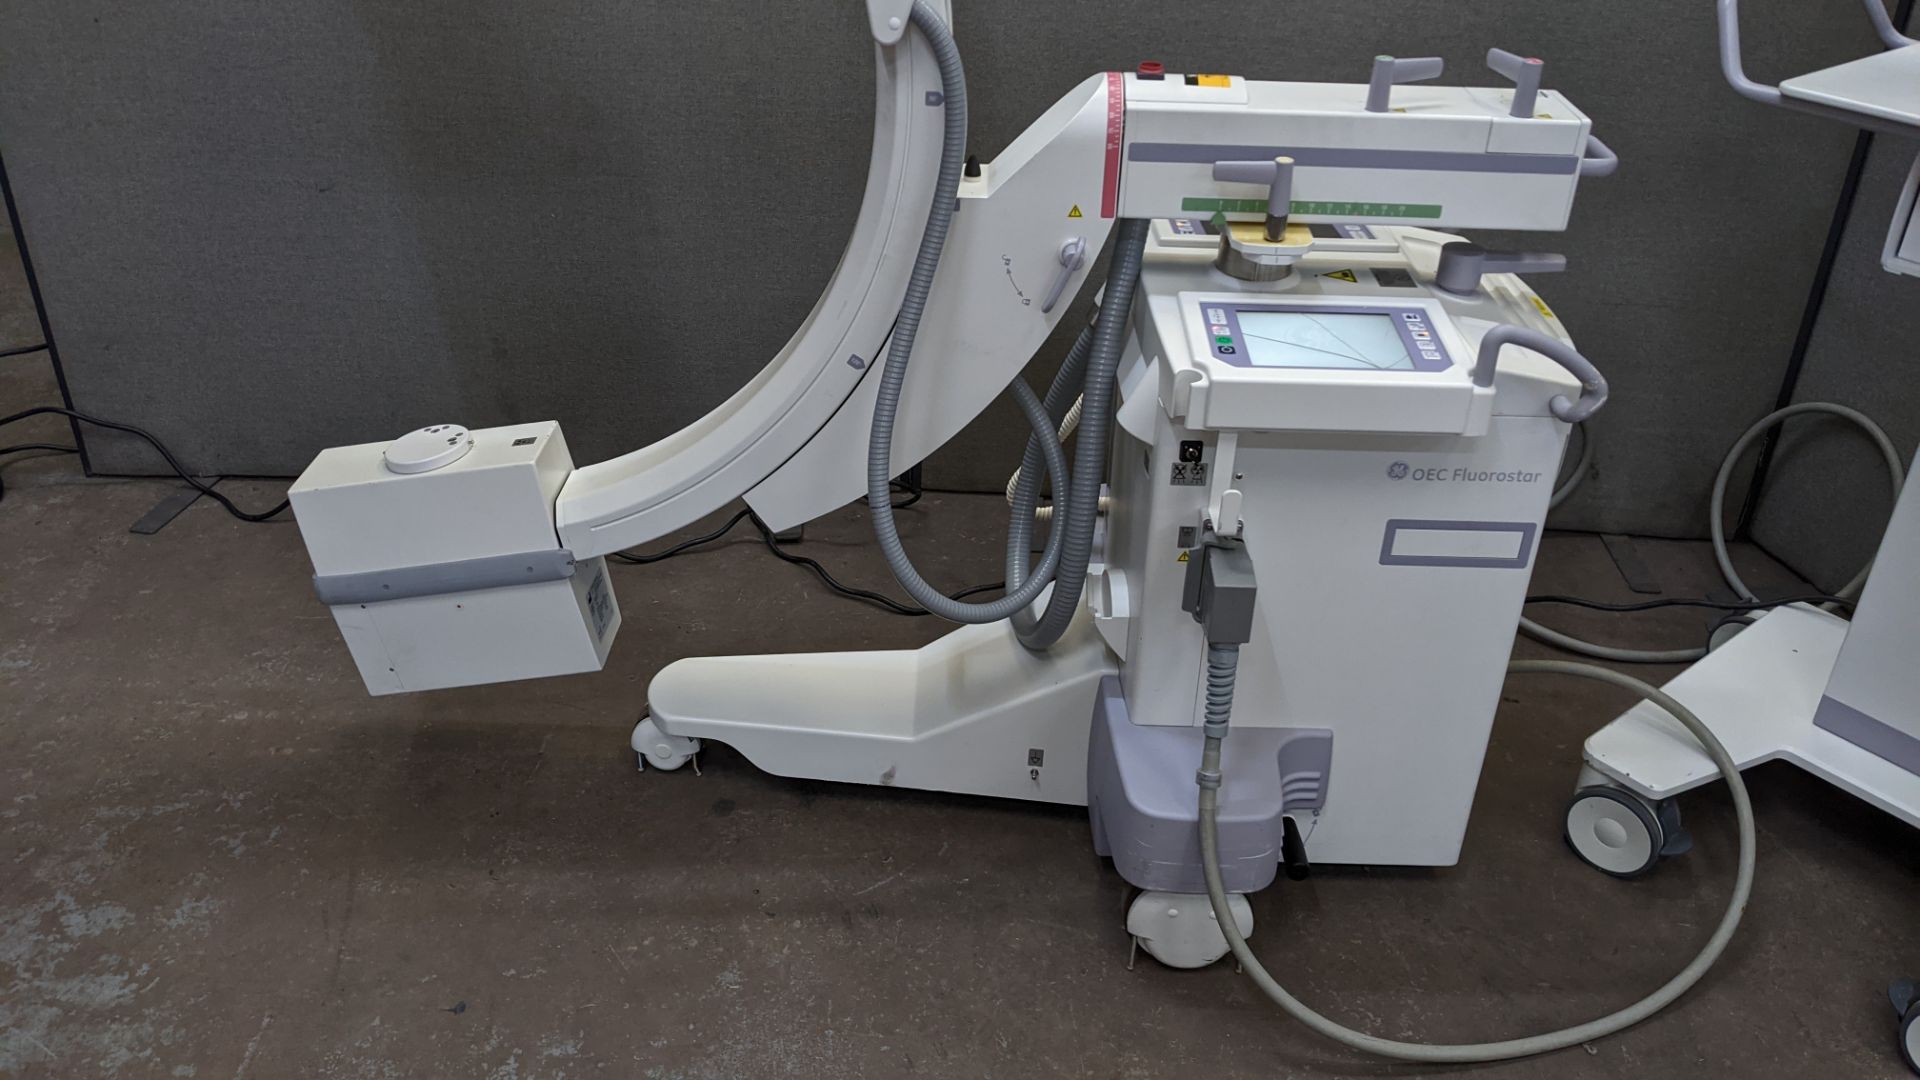 GE-OEC Fluorostar imaging system, purchased new in August 2017. EO4 Series. - Image 7 of 68